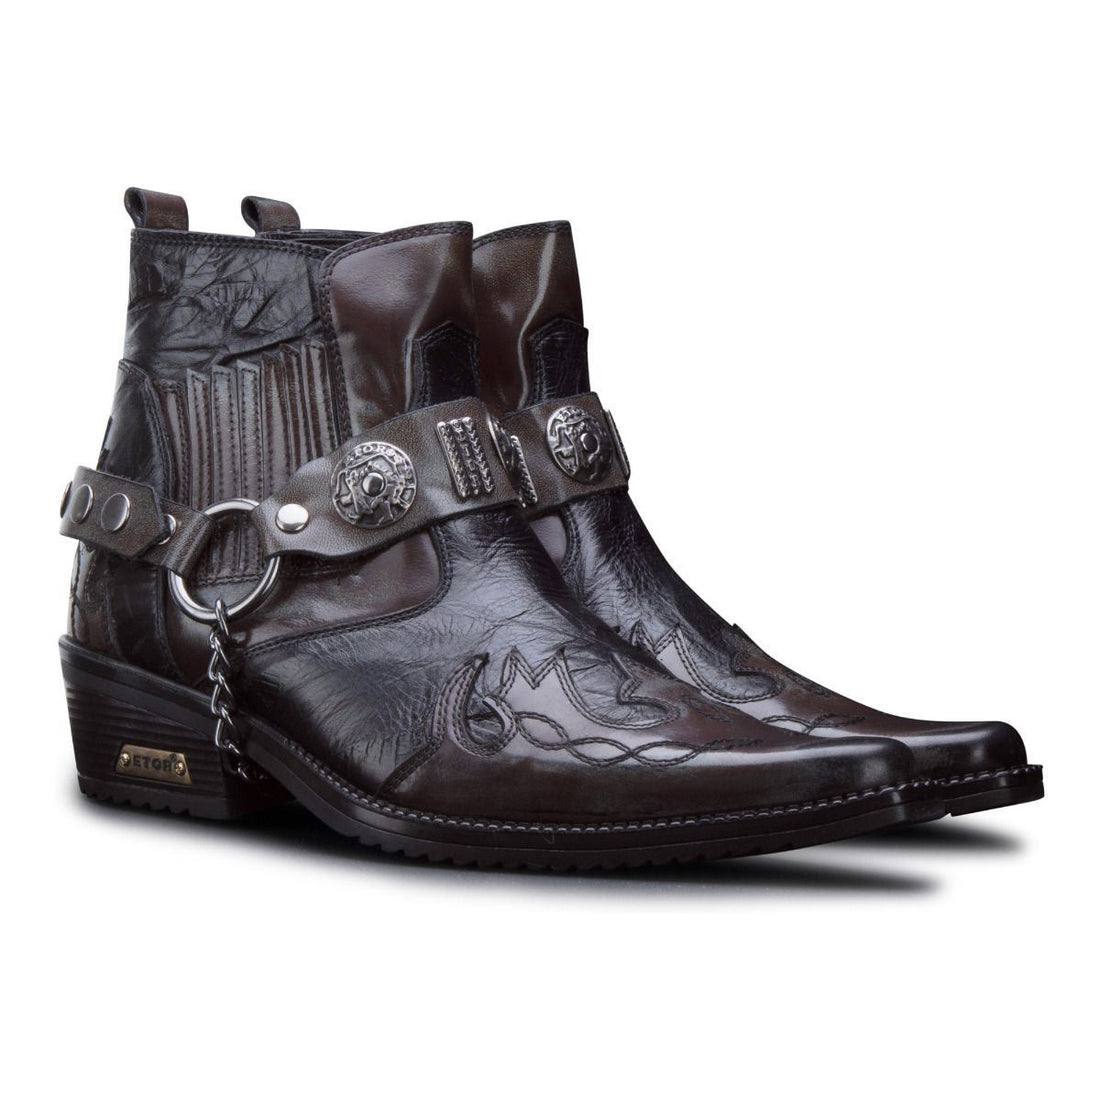 Mens Brown Leather Winklepicker Ankle Boots - Upperclass Fashions 